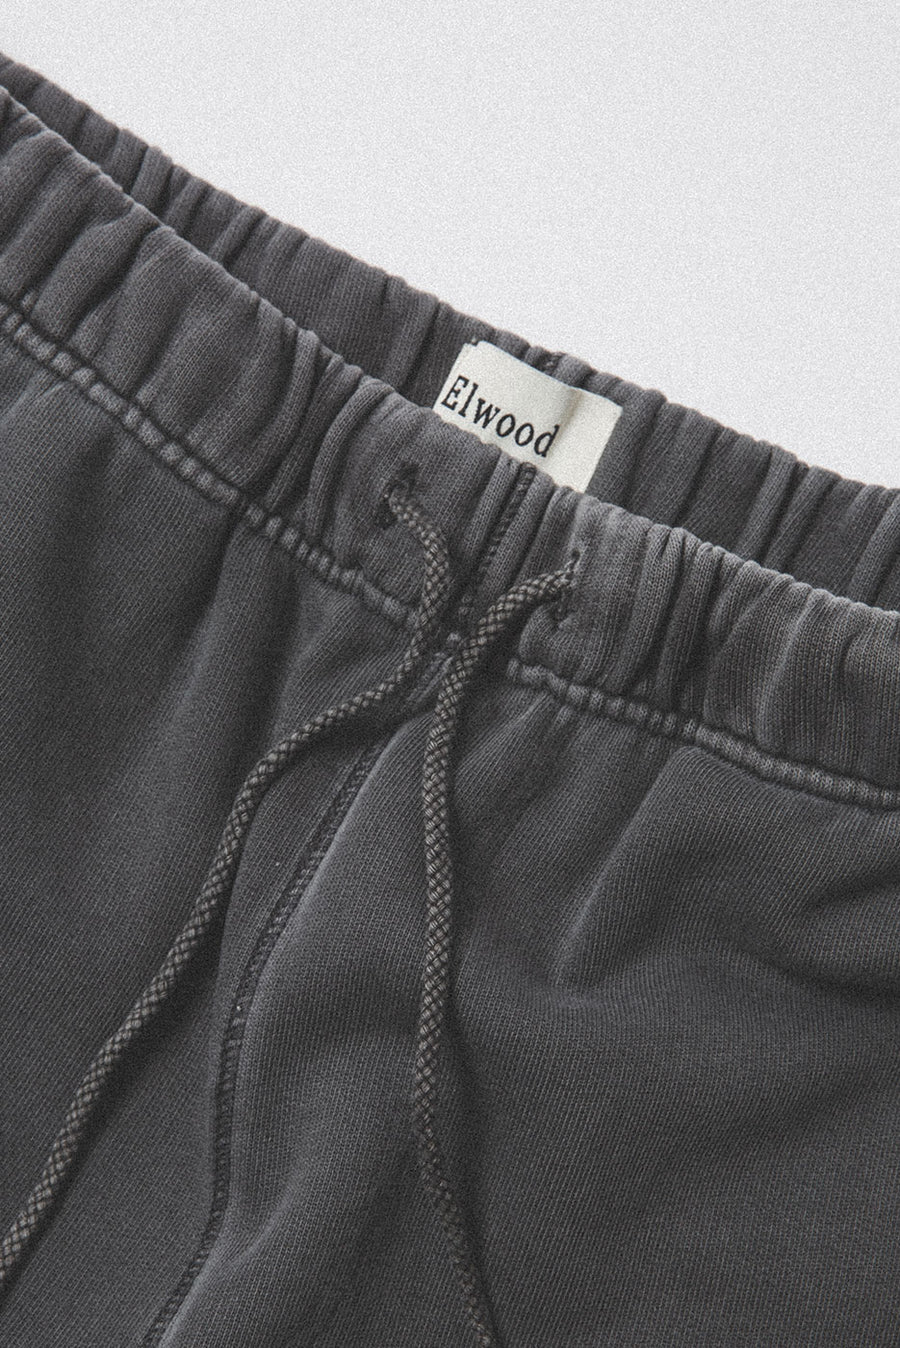 Elwood Core sweatpants vintage washed grey organic cotton | Pipe and Row